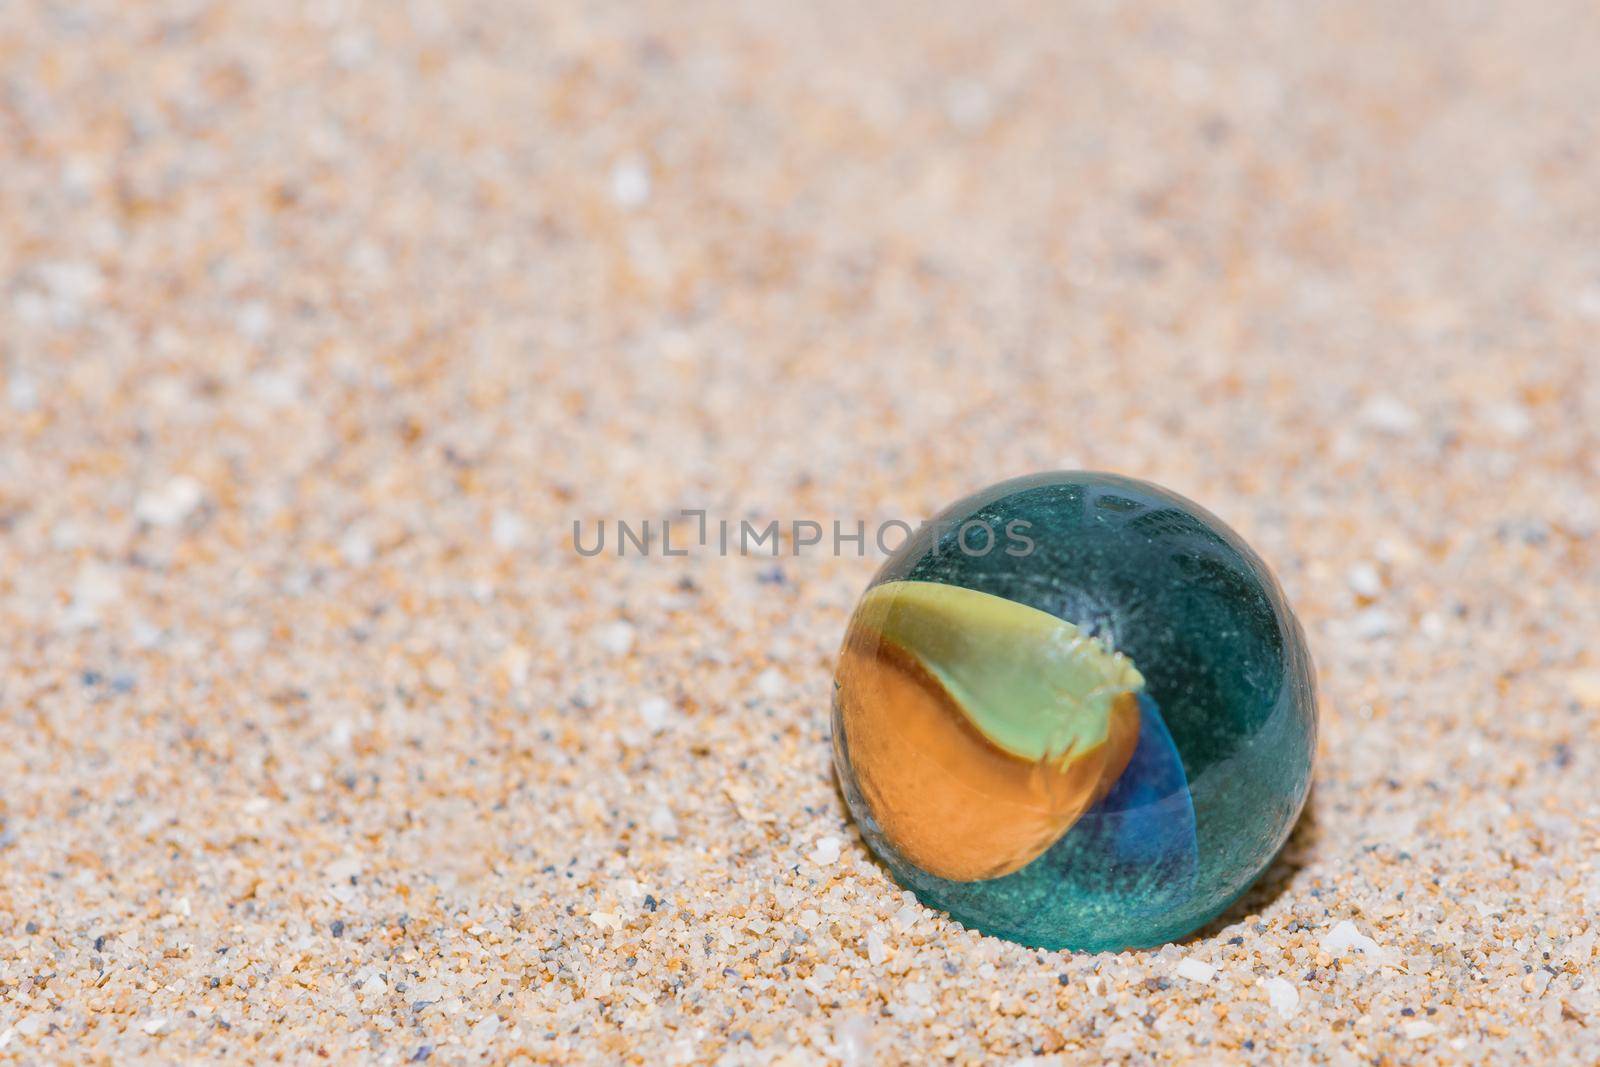 Glass marble with colored interior resting on the sand by brambillasimone